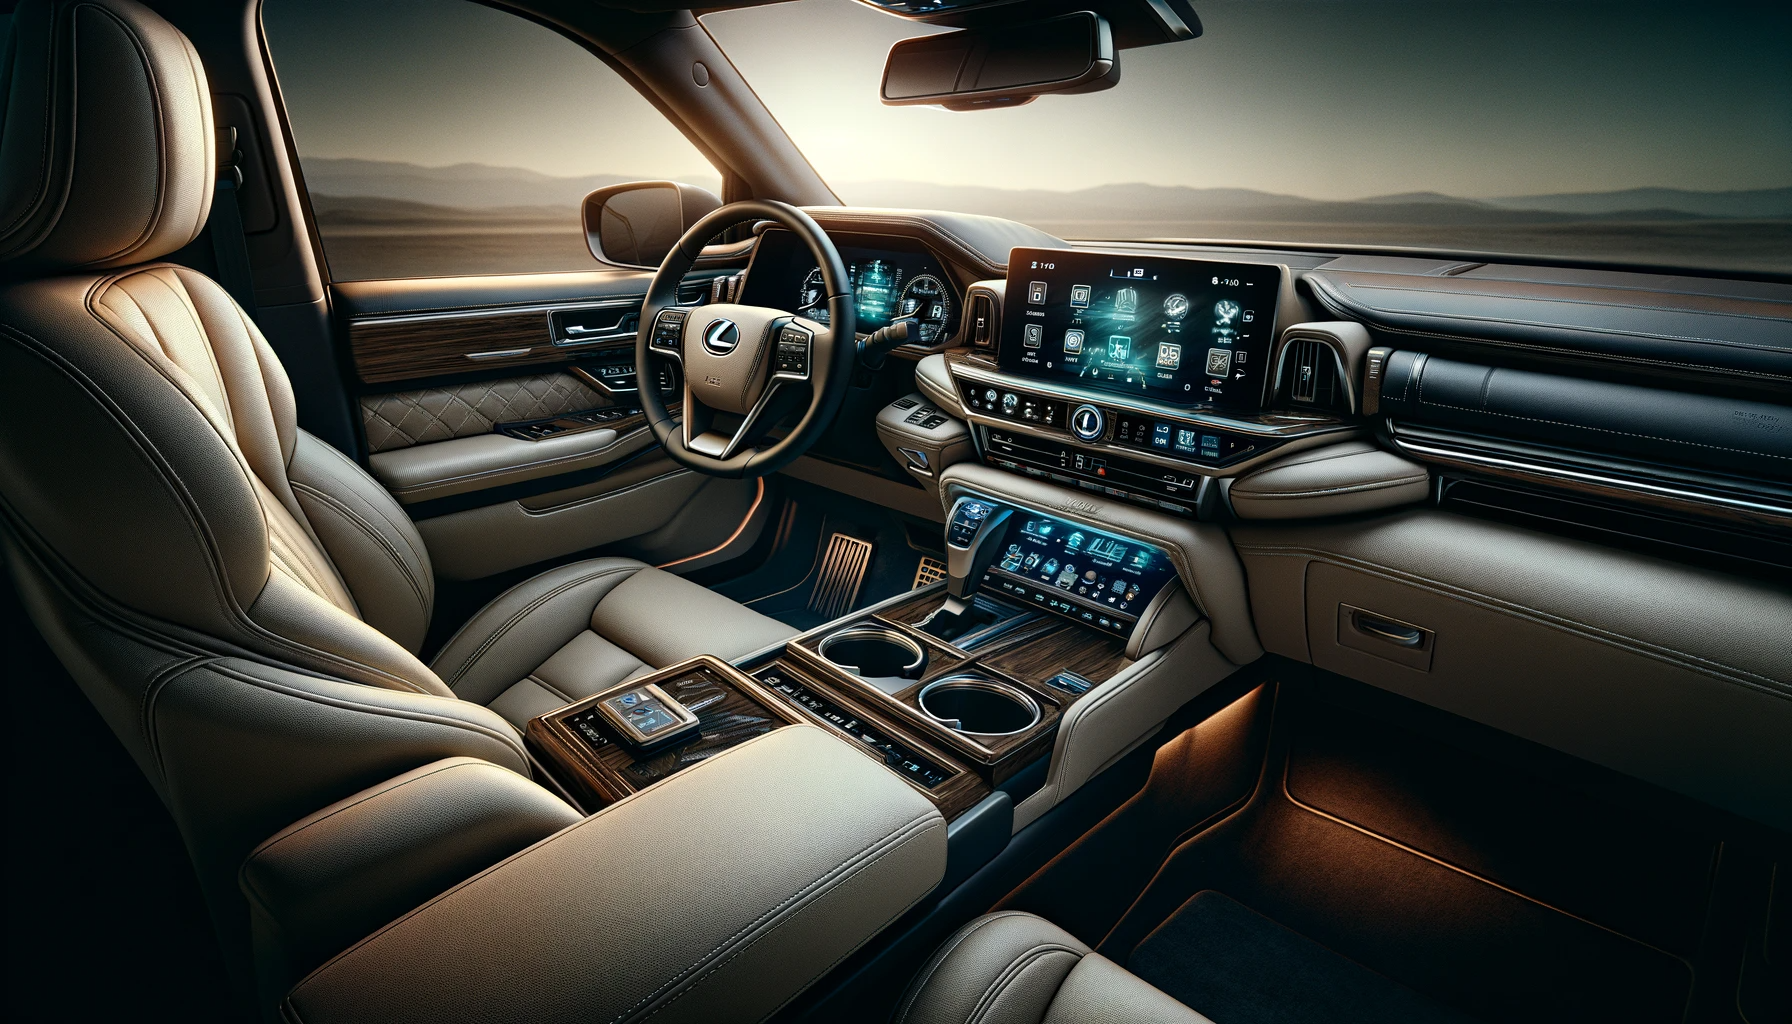 The interior of the GX550 Luxury model